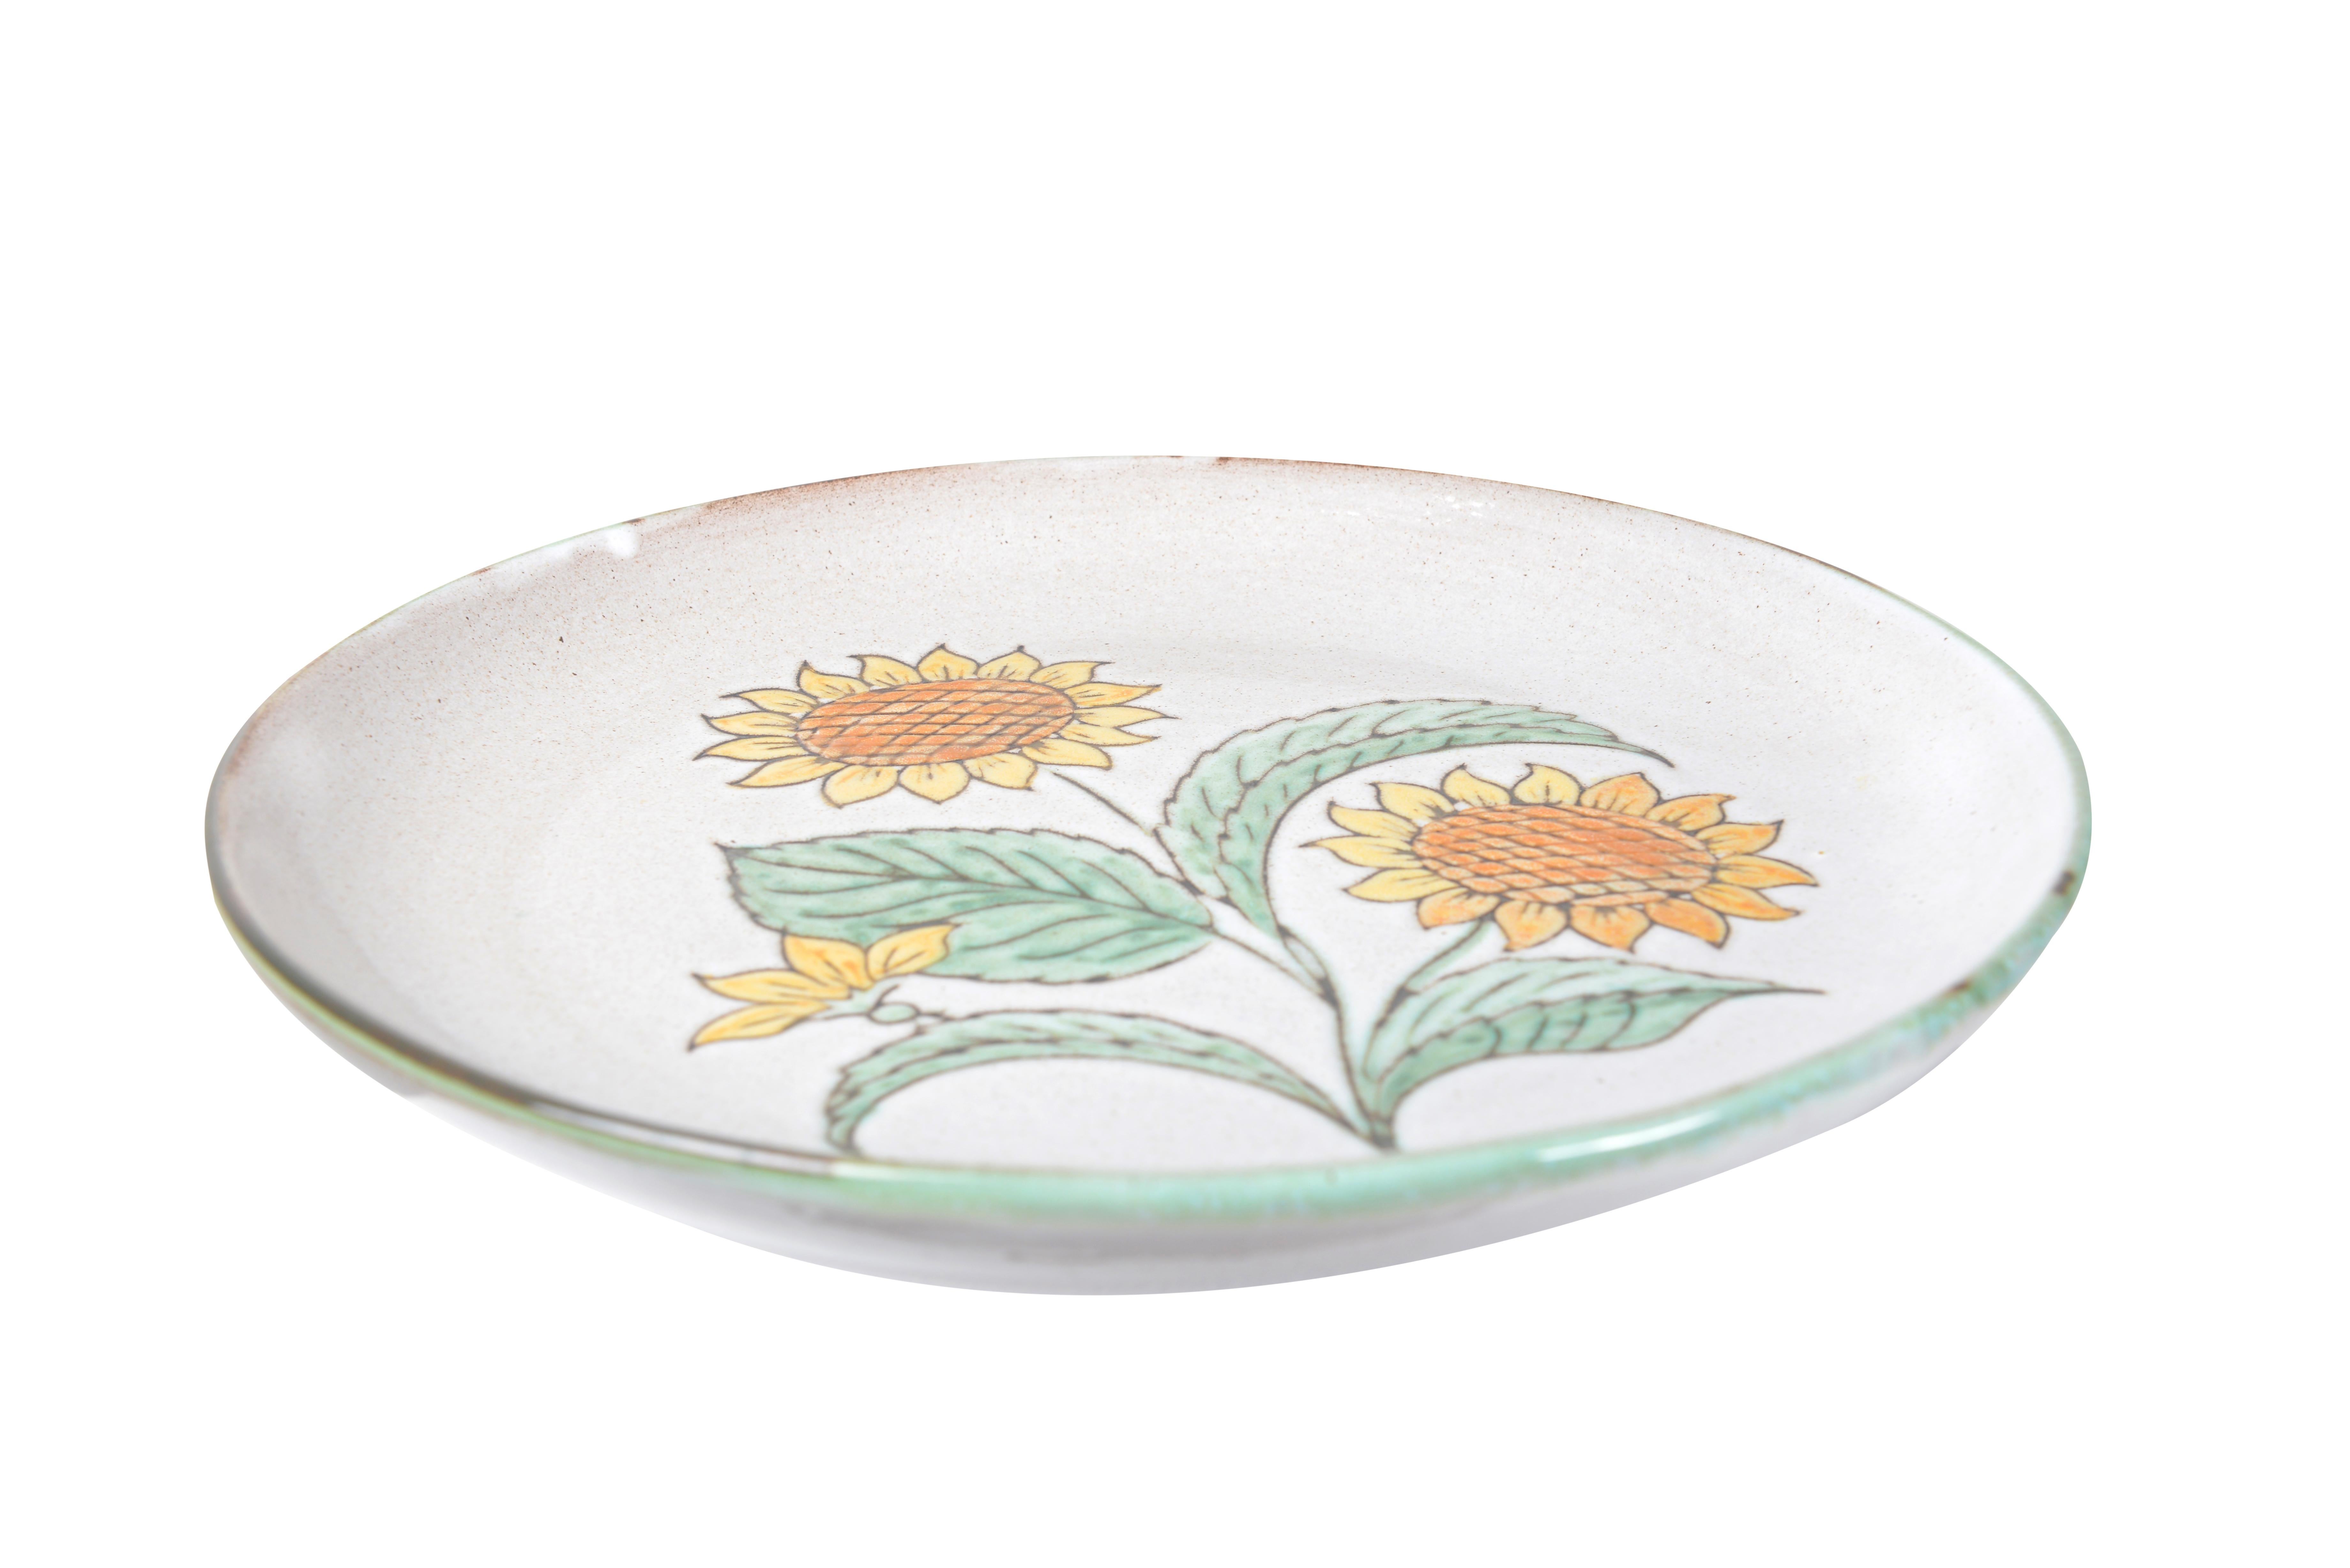 Set of 5 French Midcentury Sunflower Plates, circa 1950 For Sale 3